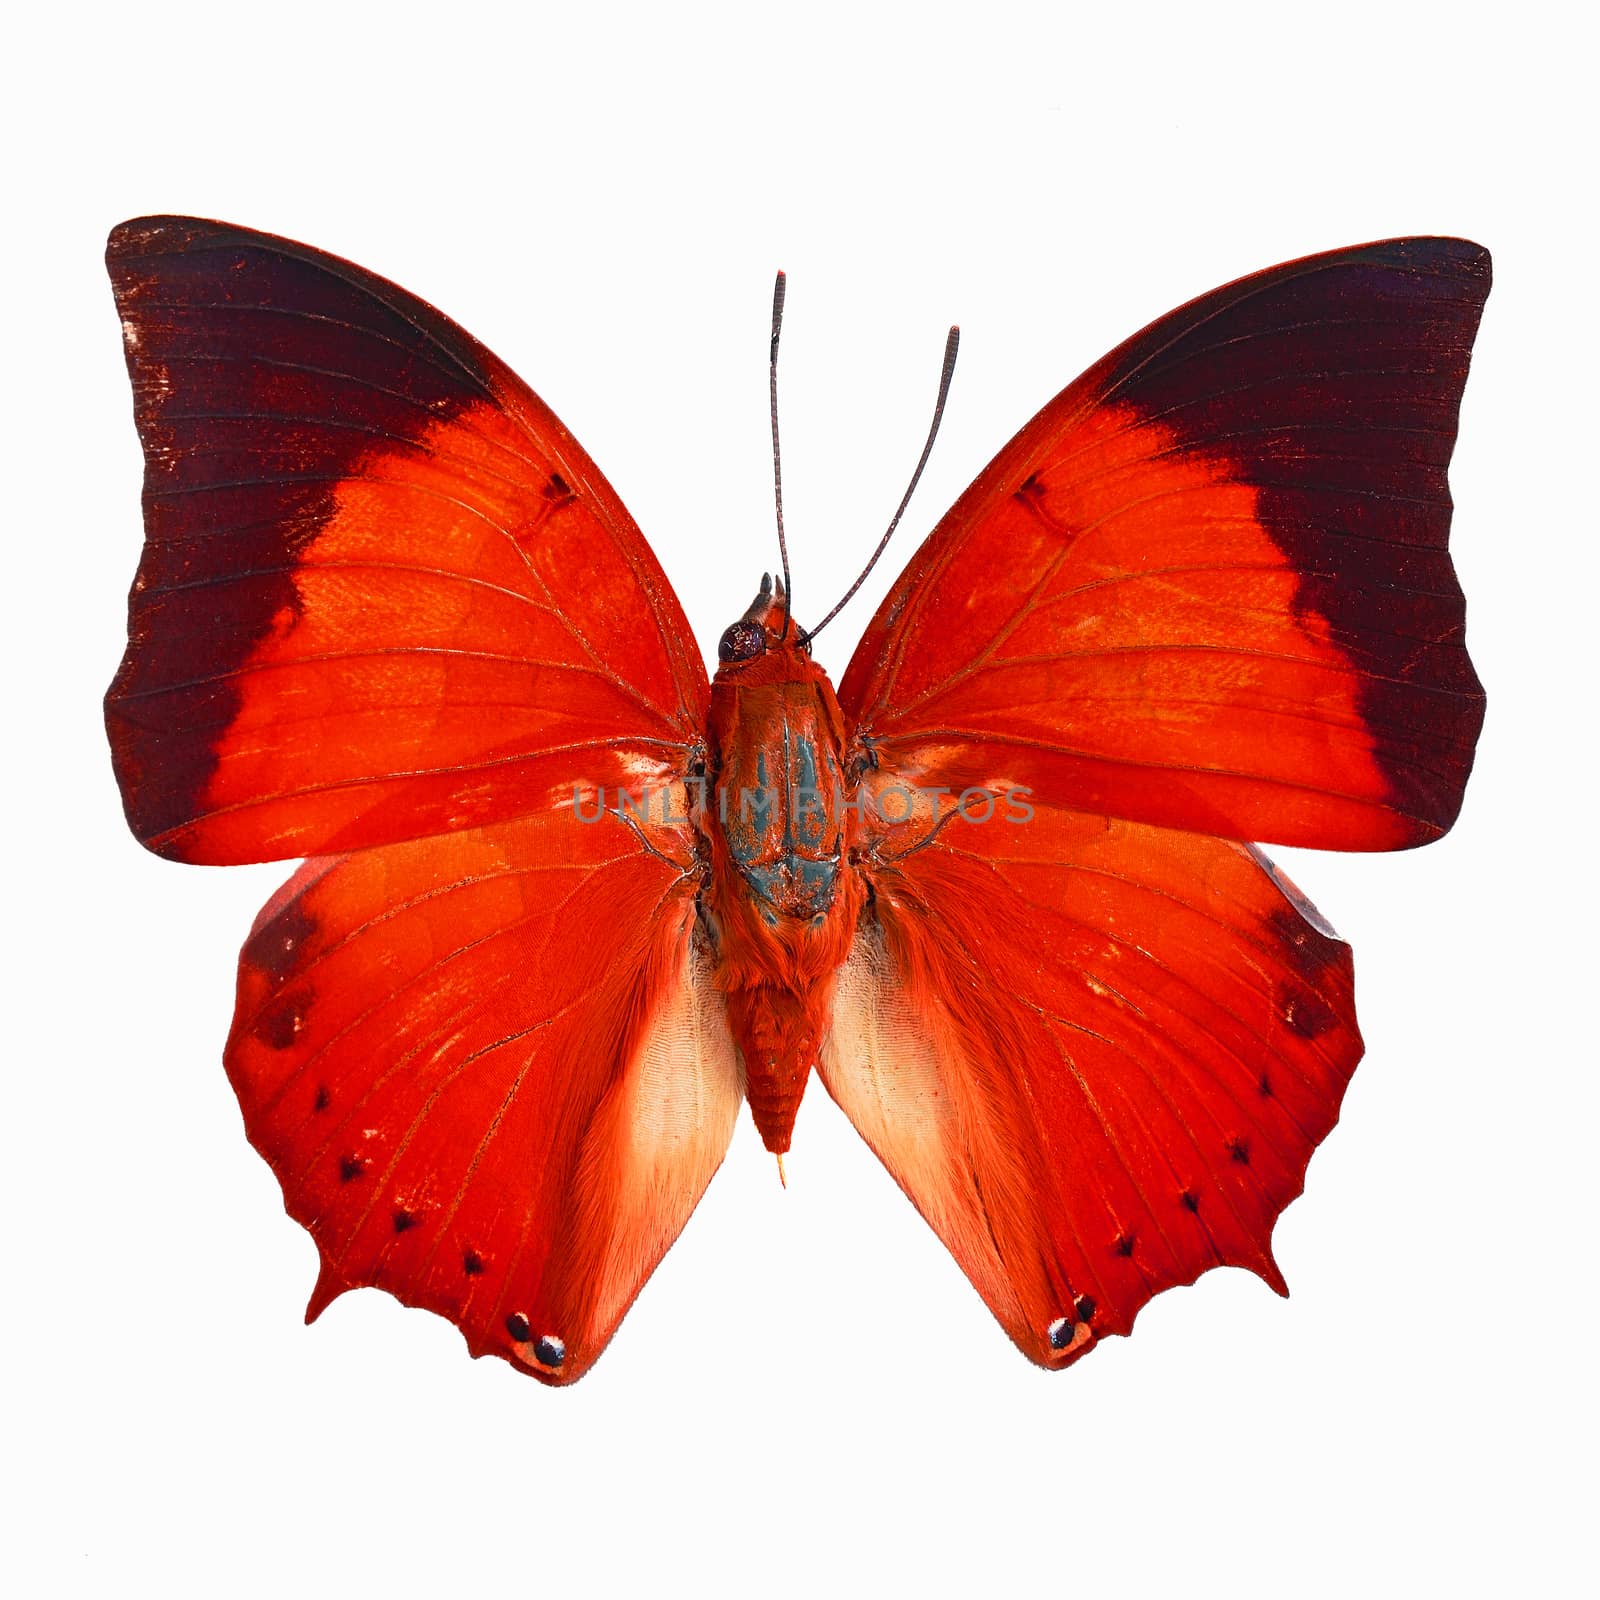 Red butterfly, Common Tawny Rajah (Charaxes bemardus) in fancy color profile, isolated on white background